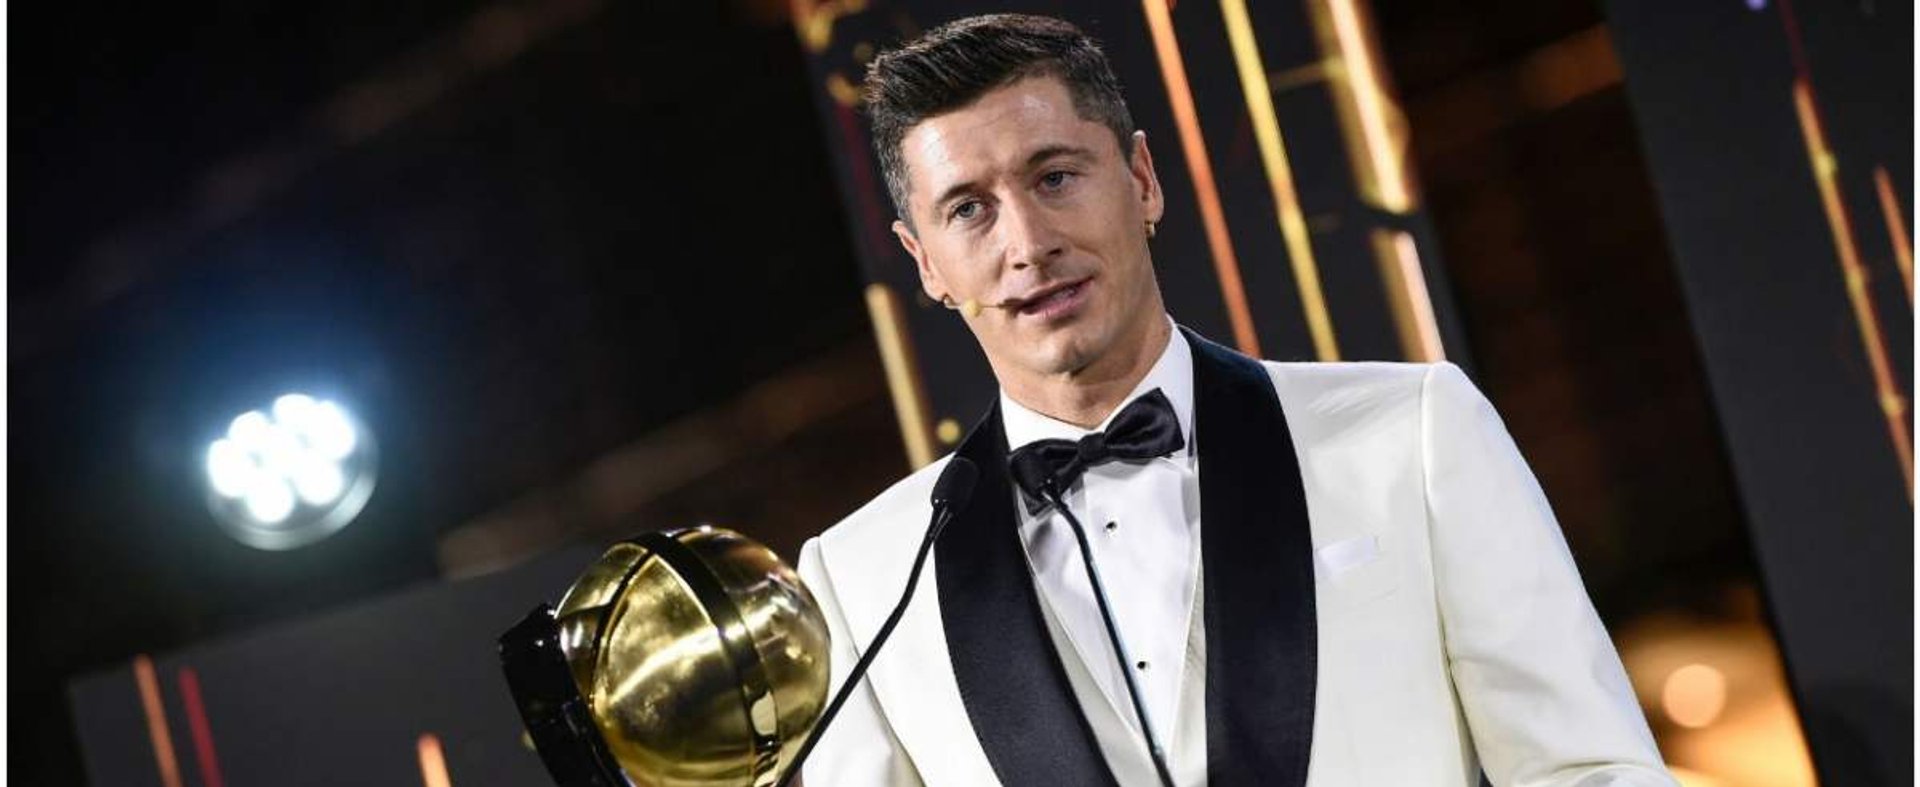 This handout picture made available on December 27, 2020 shows Polish footballer Robert Lewandowski accepting the "Player of the Year 2020" award during the 12th Dubai Globe Soccer Awards ceremony in Dubai. (Photo by Fabio FERRARI / La Presse / AFP) / ===